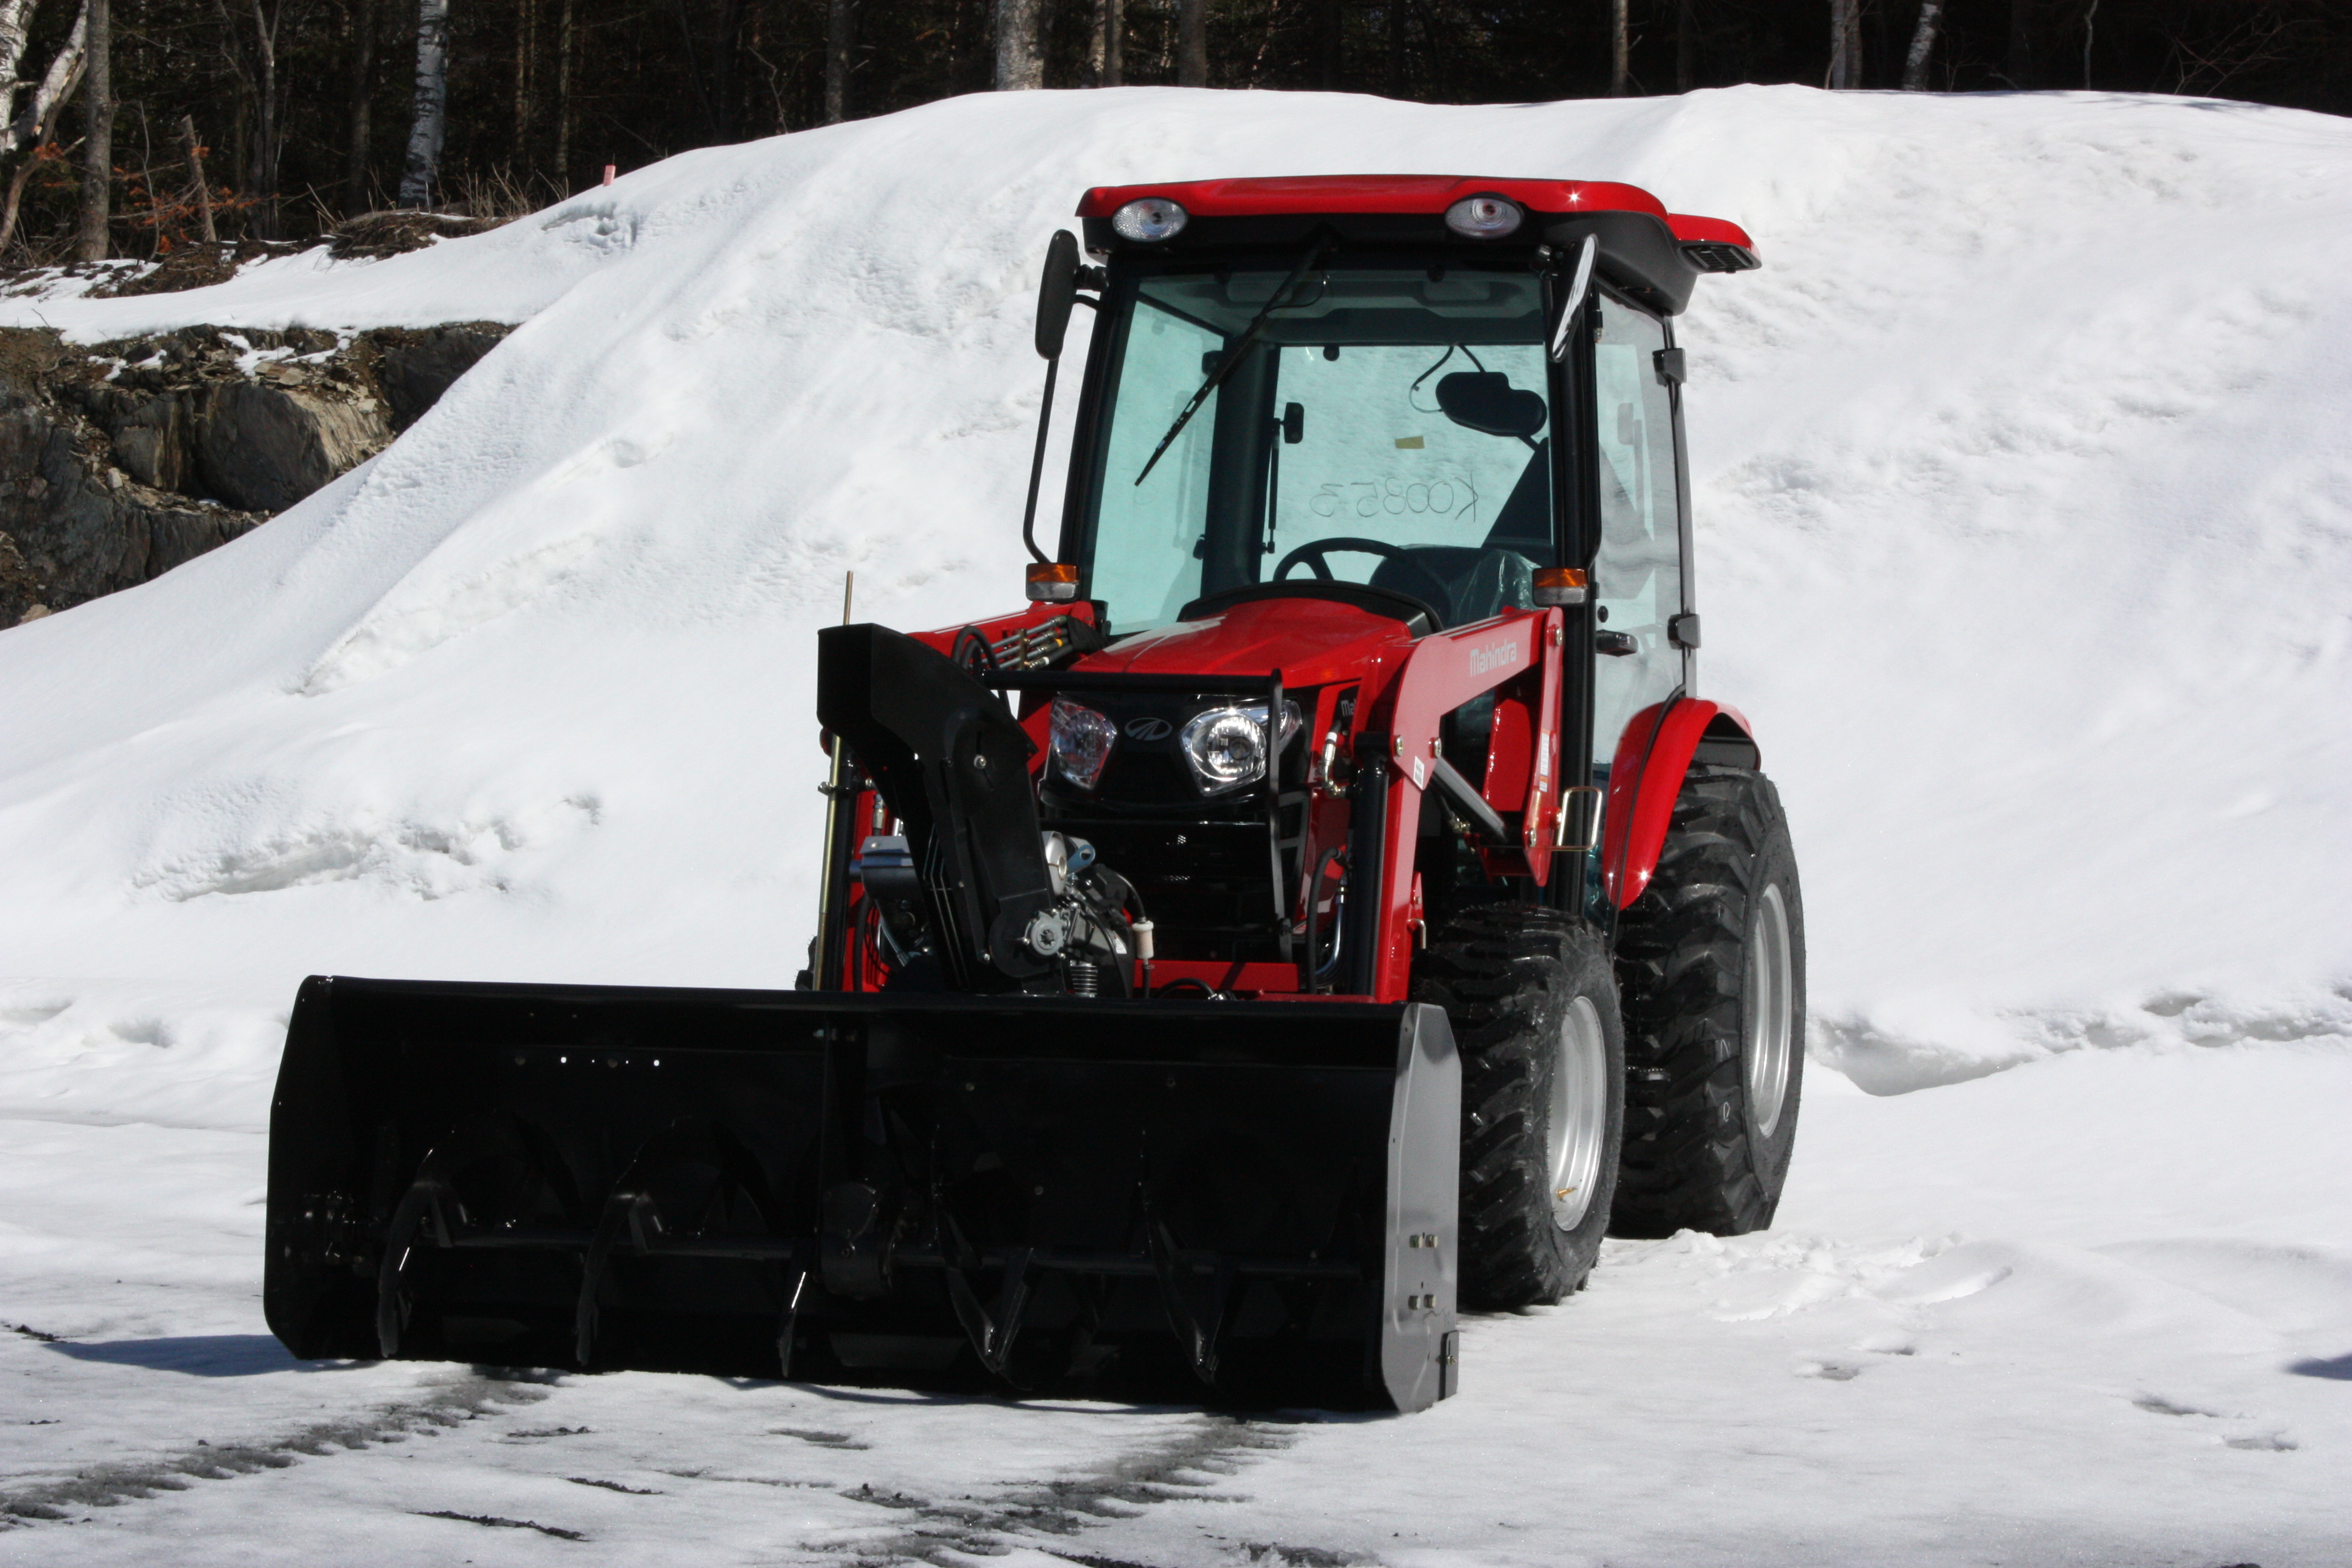 72″ Vantage Snowblower for tractors equipped with "Skid Steer" style attach